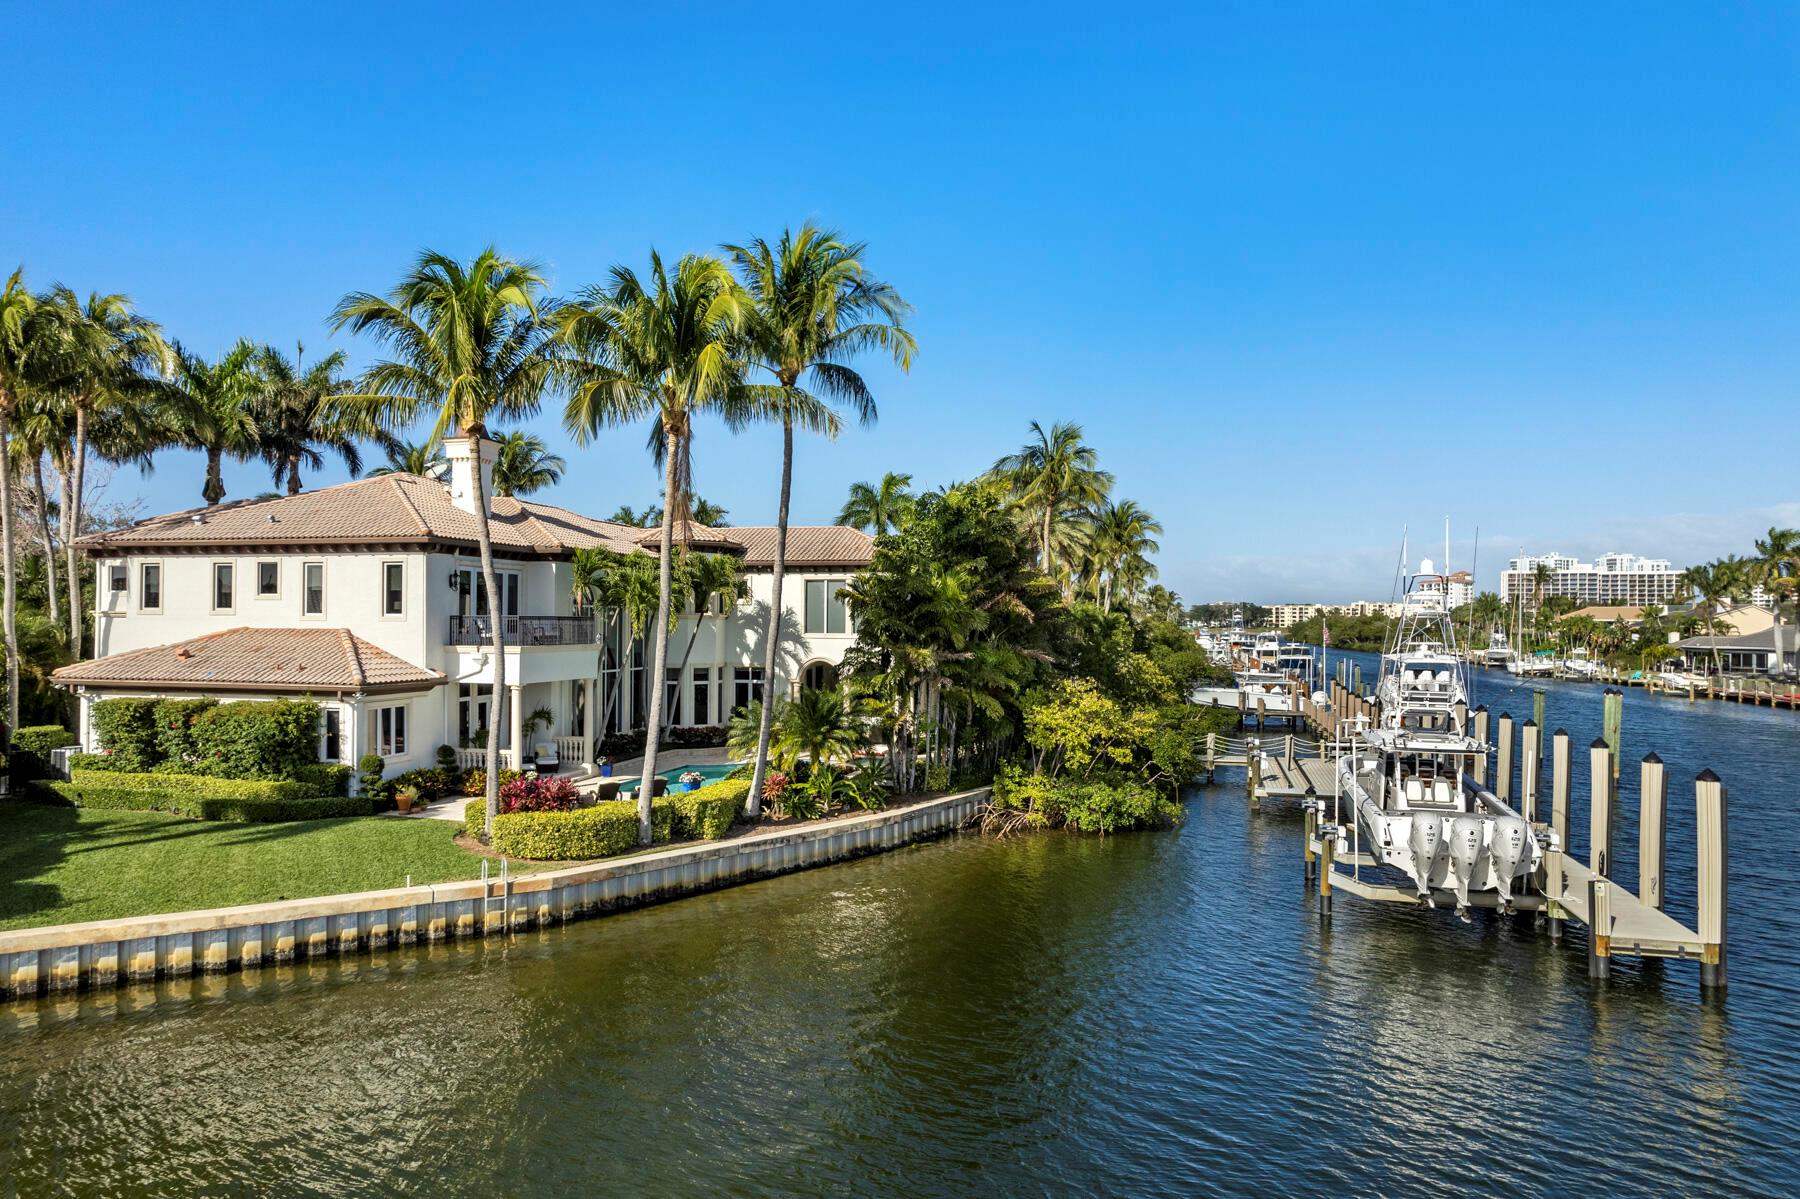 Indulge in the finest deep water dockage, capable of accommodating over a 130 foot yacht, along with tenders and toys. With a 30,000-pound lift and a 24,000-pound platform lift, enjoy effortless access to the Palm Beach Inlet, mere minutes away.  The property spans 175 feet of frontage, offering stunning southeastern views from the back of the home. Experience the epitome of luxury living in this exquisite estate, a true boater's paradise nestled in Harbour Isles. Boasting a complete renovation by Shapiro/Pertnoy Builders, this five-bedroom sanctuary leaves no detail untouched. Step inside to discover a fully updated gourmet kitchen adorned with gorgeous Labradorite stone, complemented by all Lead's Custom cabinetry and beautiful floor to ceiling built-in entertainment center. Unwind in the primary suite, featuring floor-to-ceiling windows that frame tranquil water views, and a spacious his-and-her bath, completely updated for your comfort.  Entertain in style with a bonus room over the garage, serving as the ultimate entertainment hub with a wet bar, large TV, and ample space for ping pong or pool table. No detail is overlooked, with a large air-conditioned tackle room providing convenient access to the dock area.  Additional features include an extended three-car garage for ample storage, a renovated pool with expansive decking, covered loggia, and summer kitchen - perfect for hosting unforgettable parties. Embrace modern convenience with a new Crestron system, newer impact windows and doors, and a whole house generator.

Harbour Isles is a gated waterfront community with 24 guard supervision. Easily accessible to I95 and the Turnpike without bridge interruption.

Don't miss the opportunity to make this waterfront estate your own, offering unparalleled luxury and sophistication.